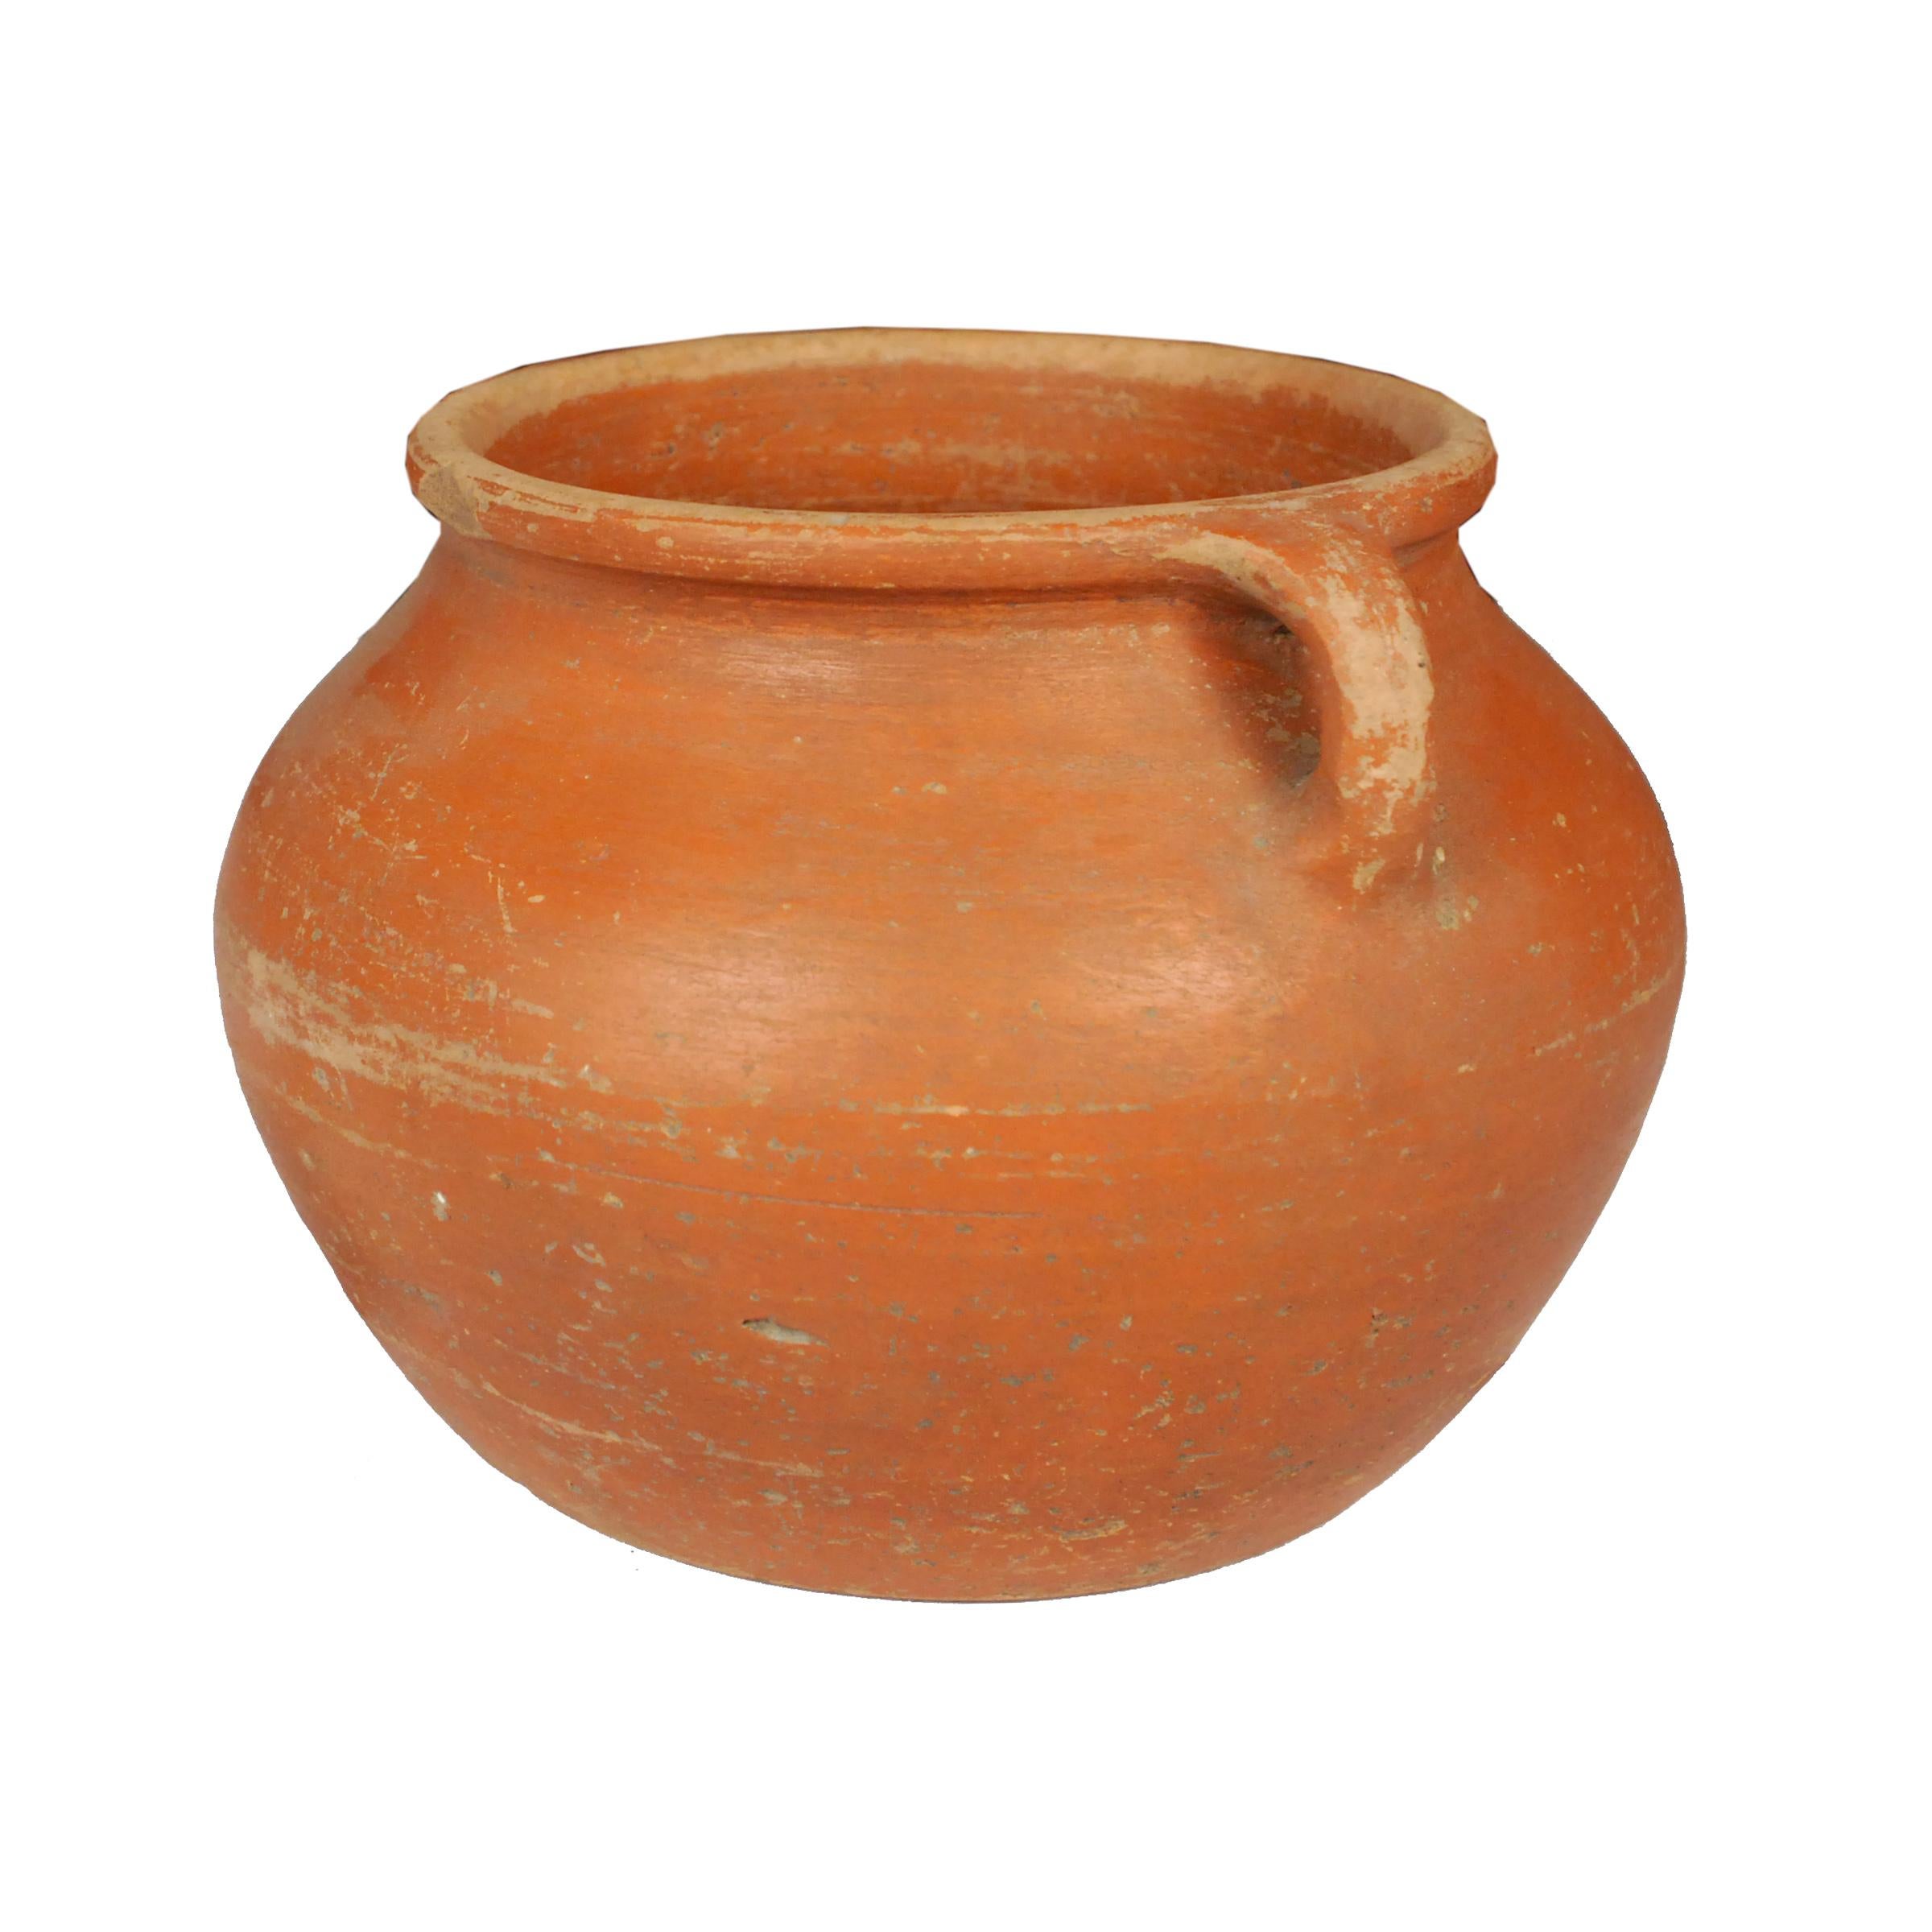 Based on prototypes fired in ancient Chinese kilns, this jar's perfect proportions haven't changed much since the Bronze Age. Keeping in the tradition of its predecessors, this early 20th century ceramic vessel is glazed with a slip of red clay,